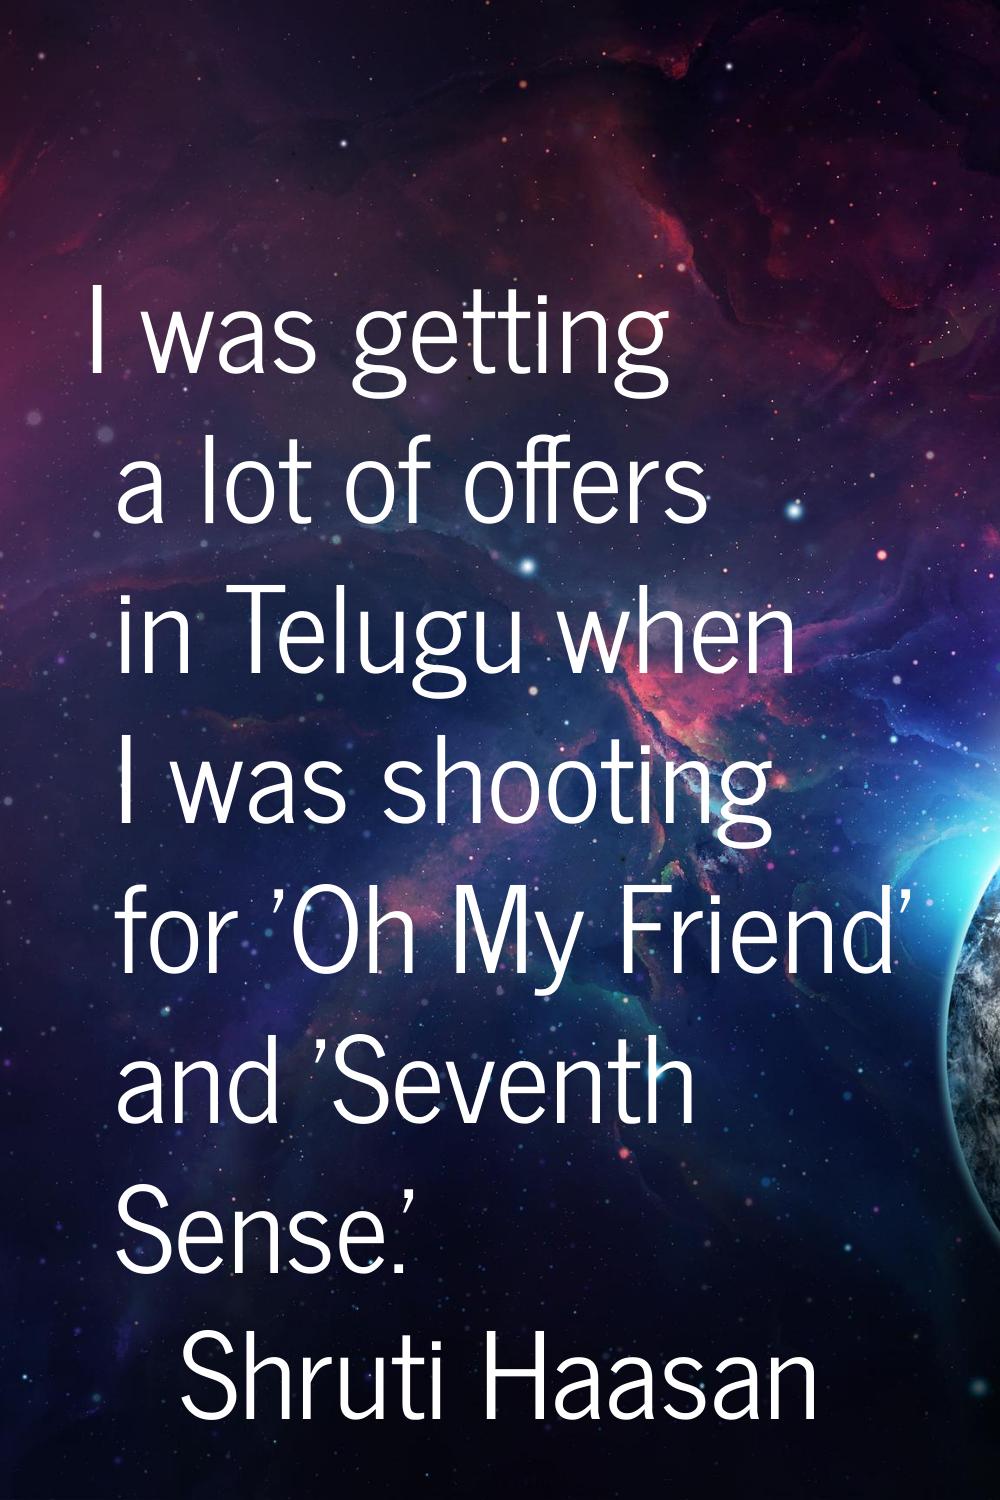 I was getting a lot of offers in Telugu when I was shooting for 'Oh My Friend' and 'Seventh Sense.'